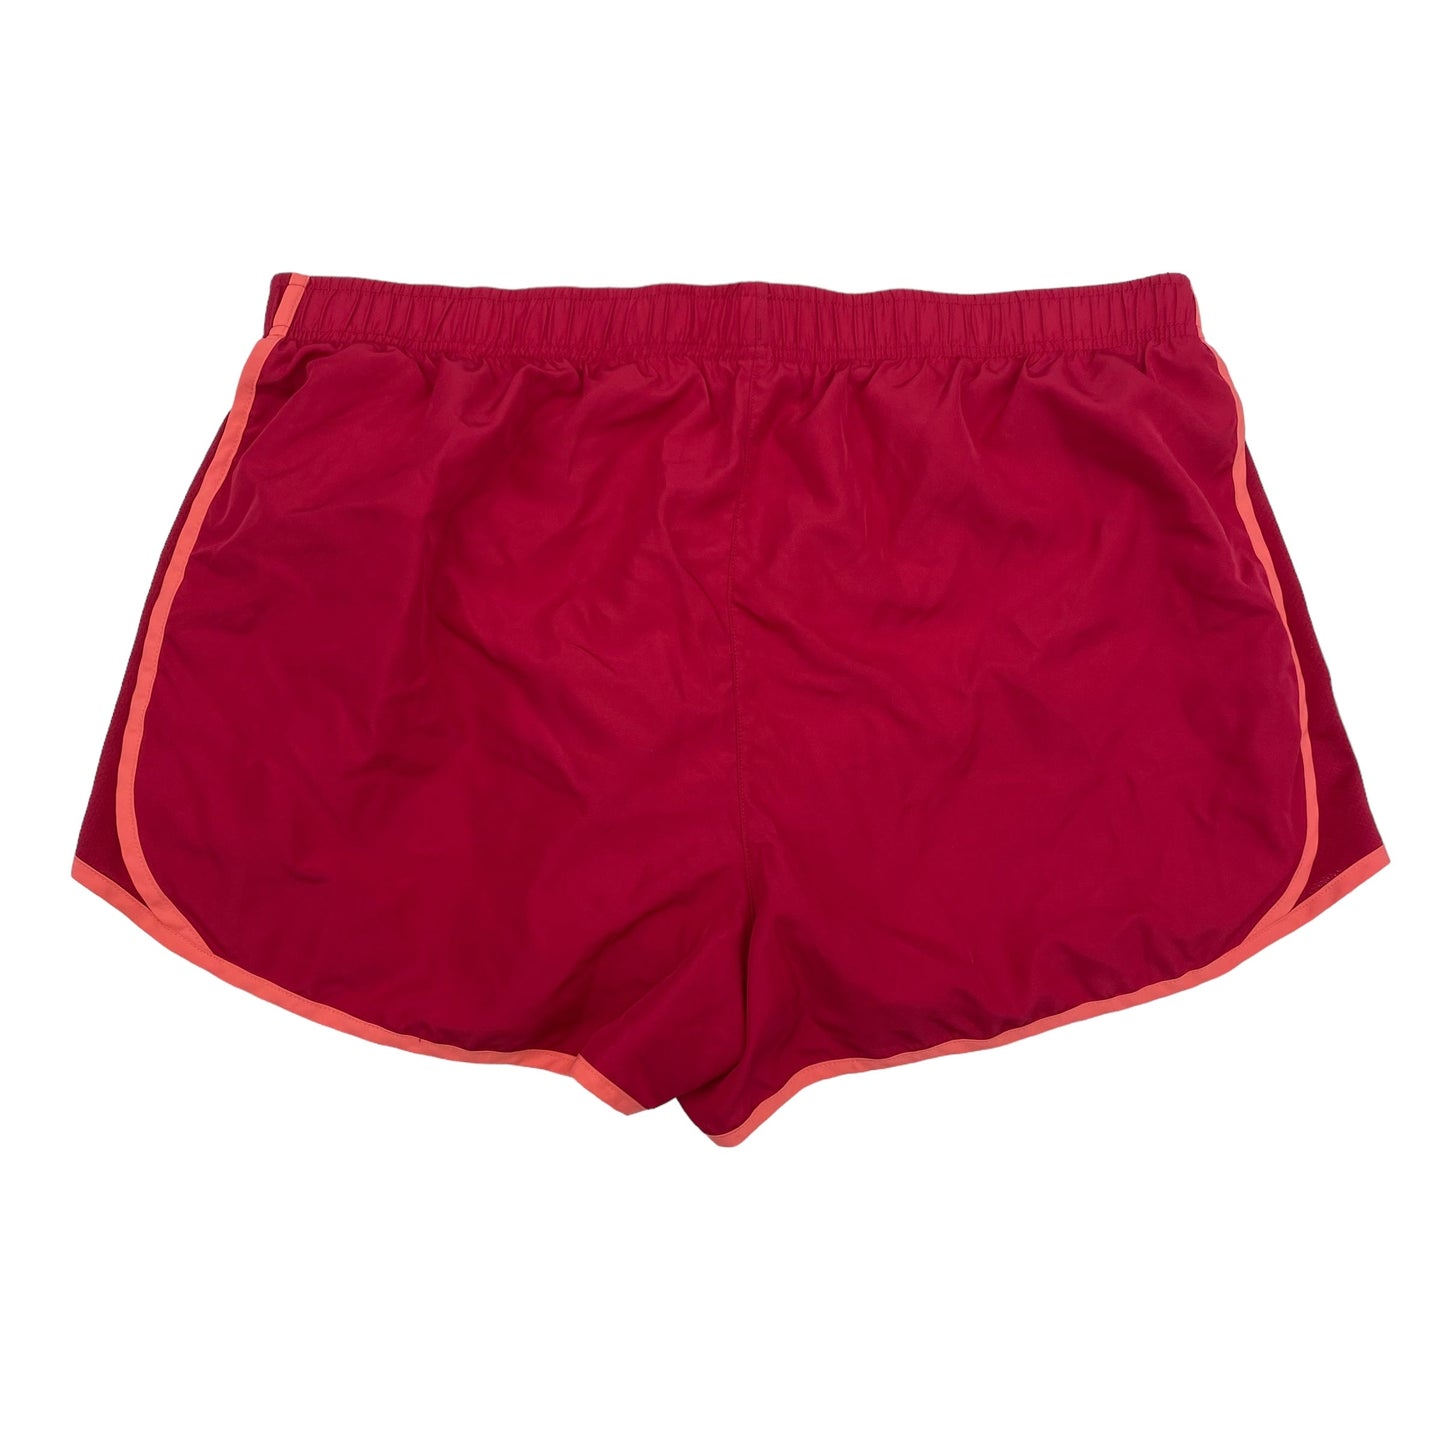 RED MEMBERS MARK ATHLETIC SHORTS, Size 2X